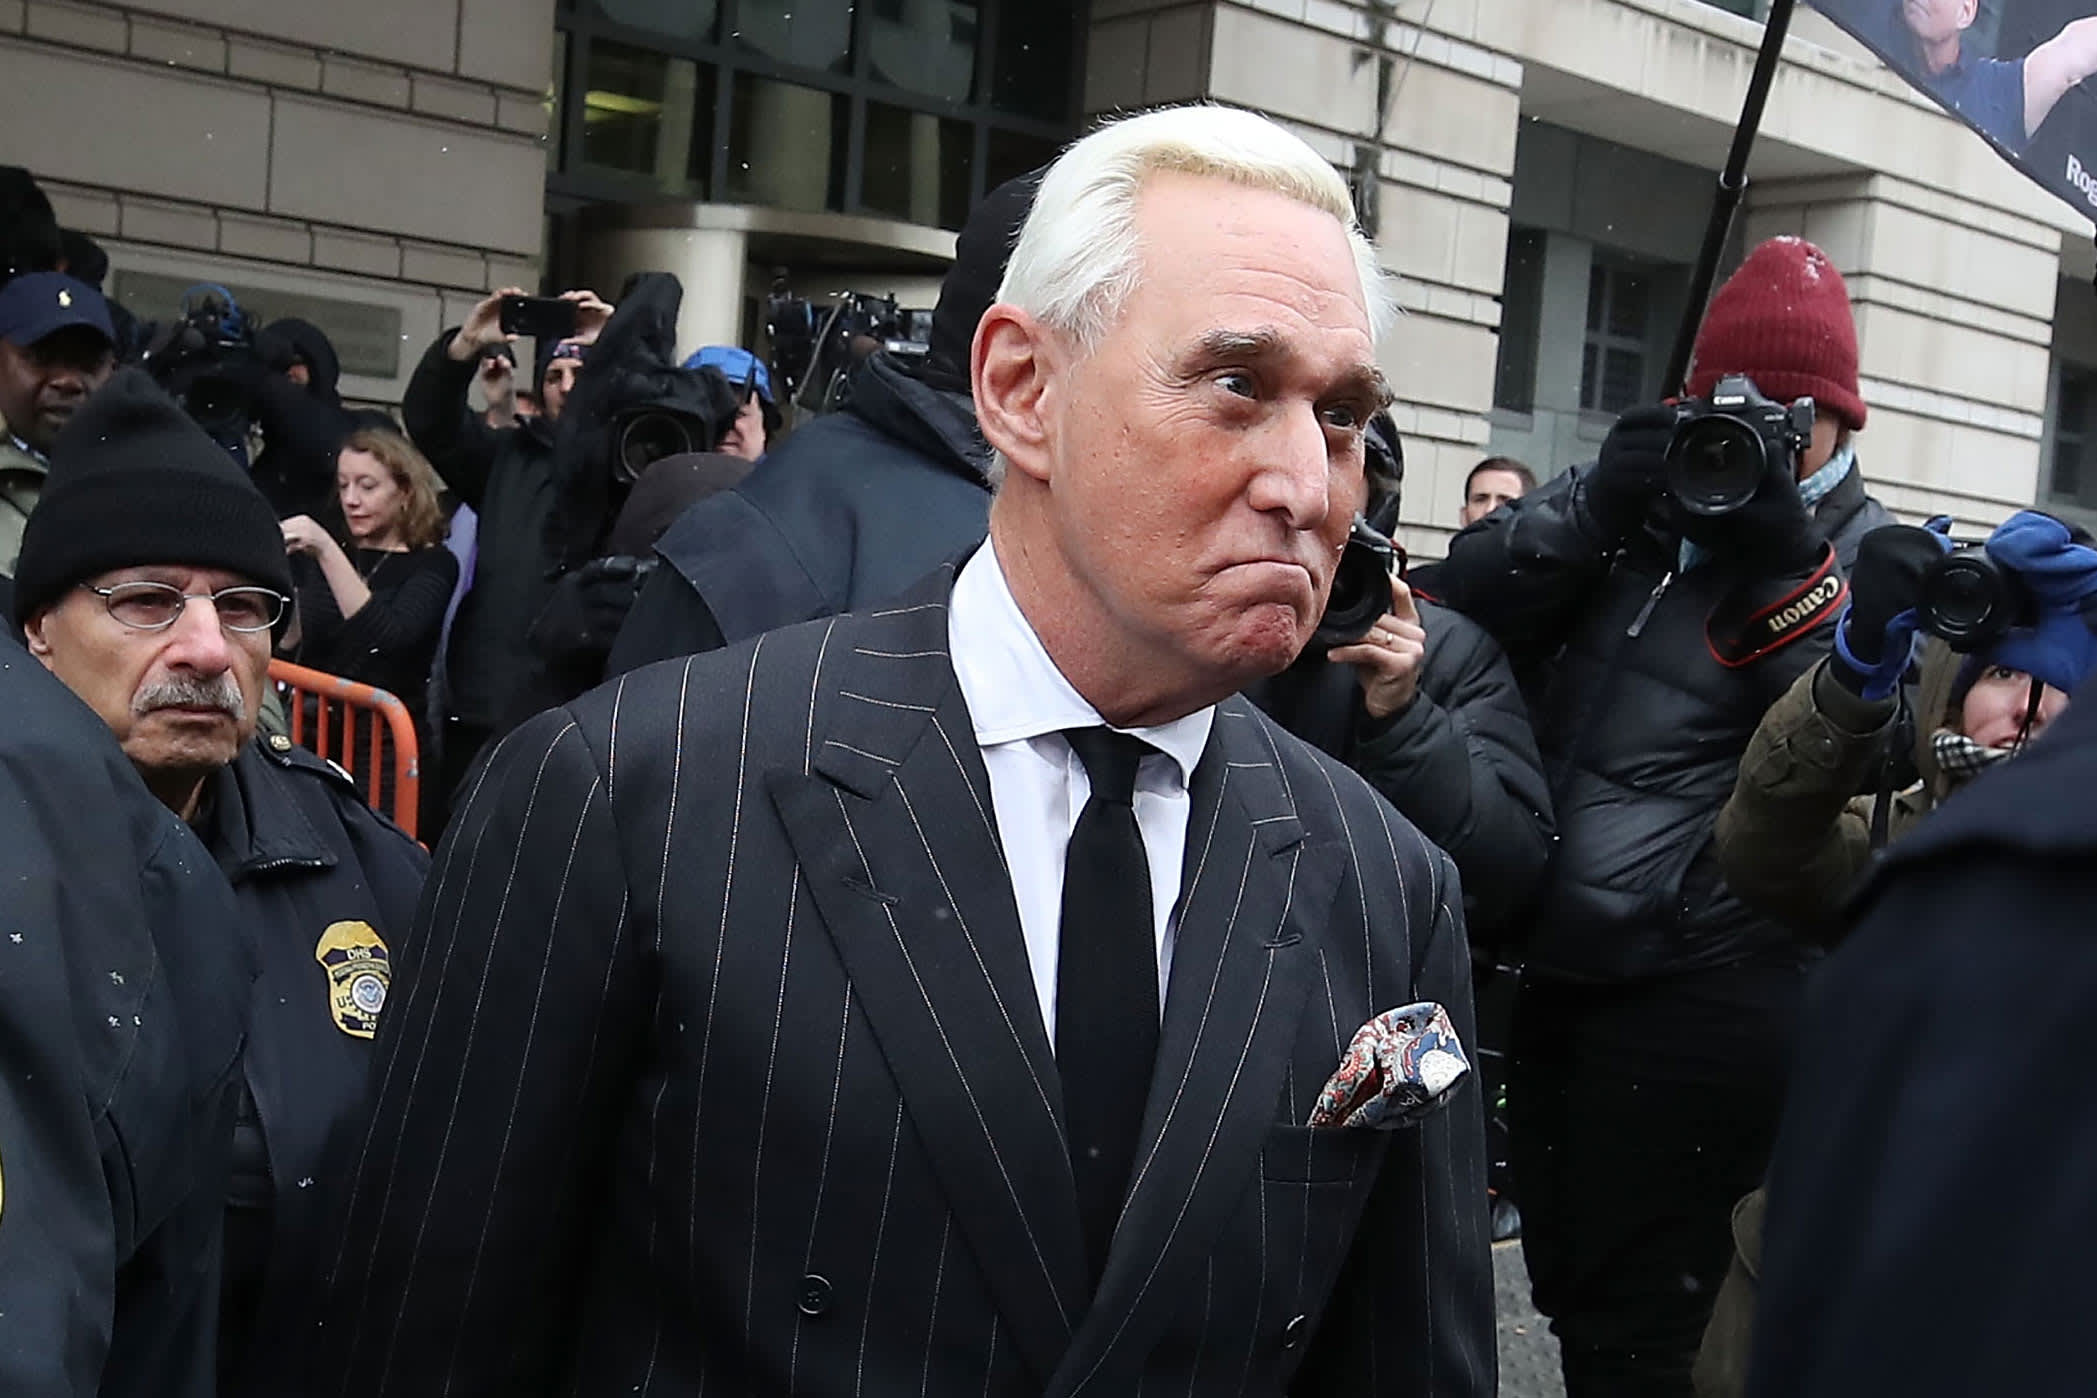 Trump calls for new Roger Stone trial, judges call emergency meeting